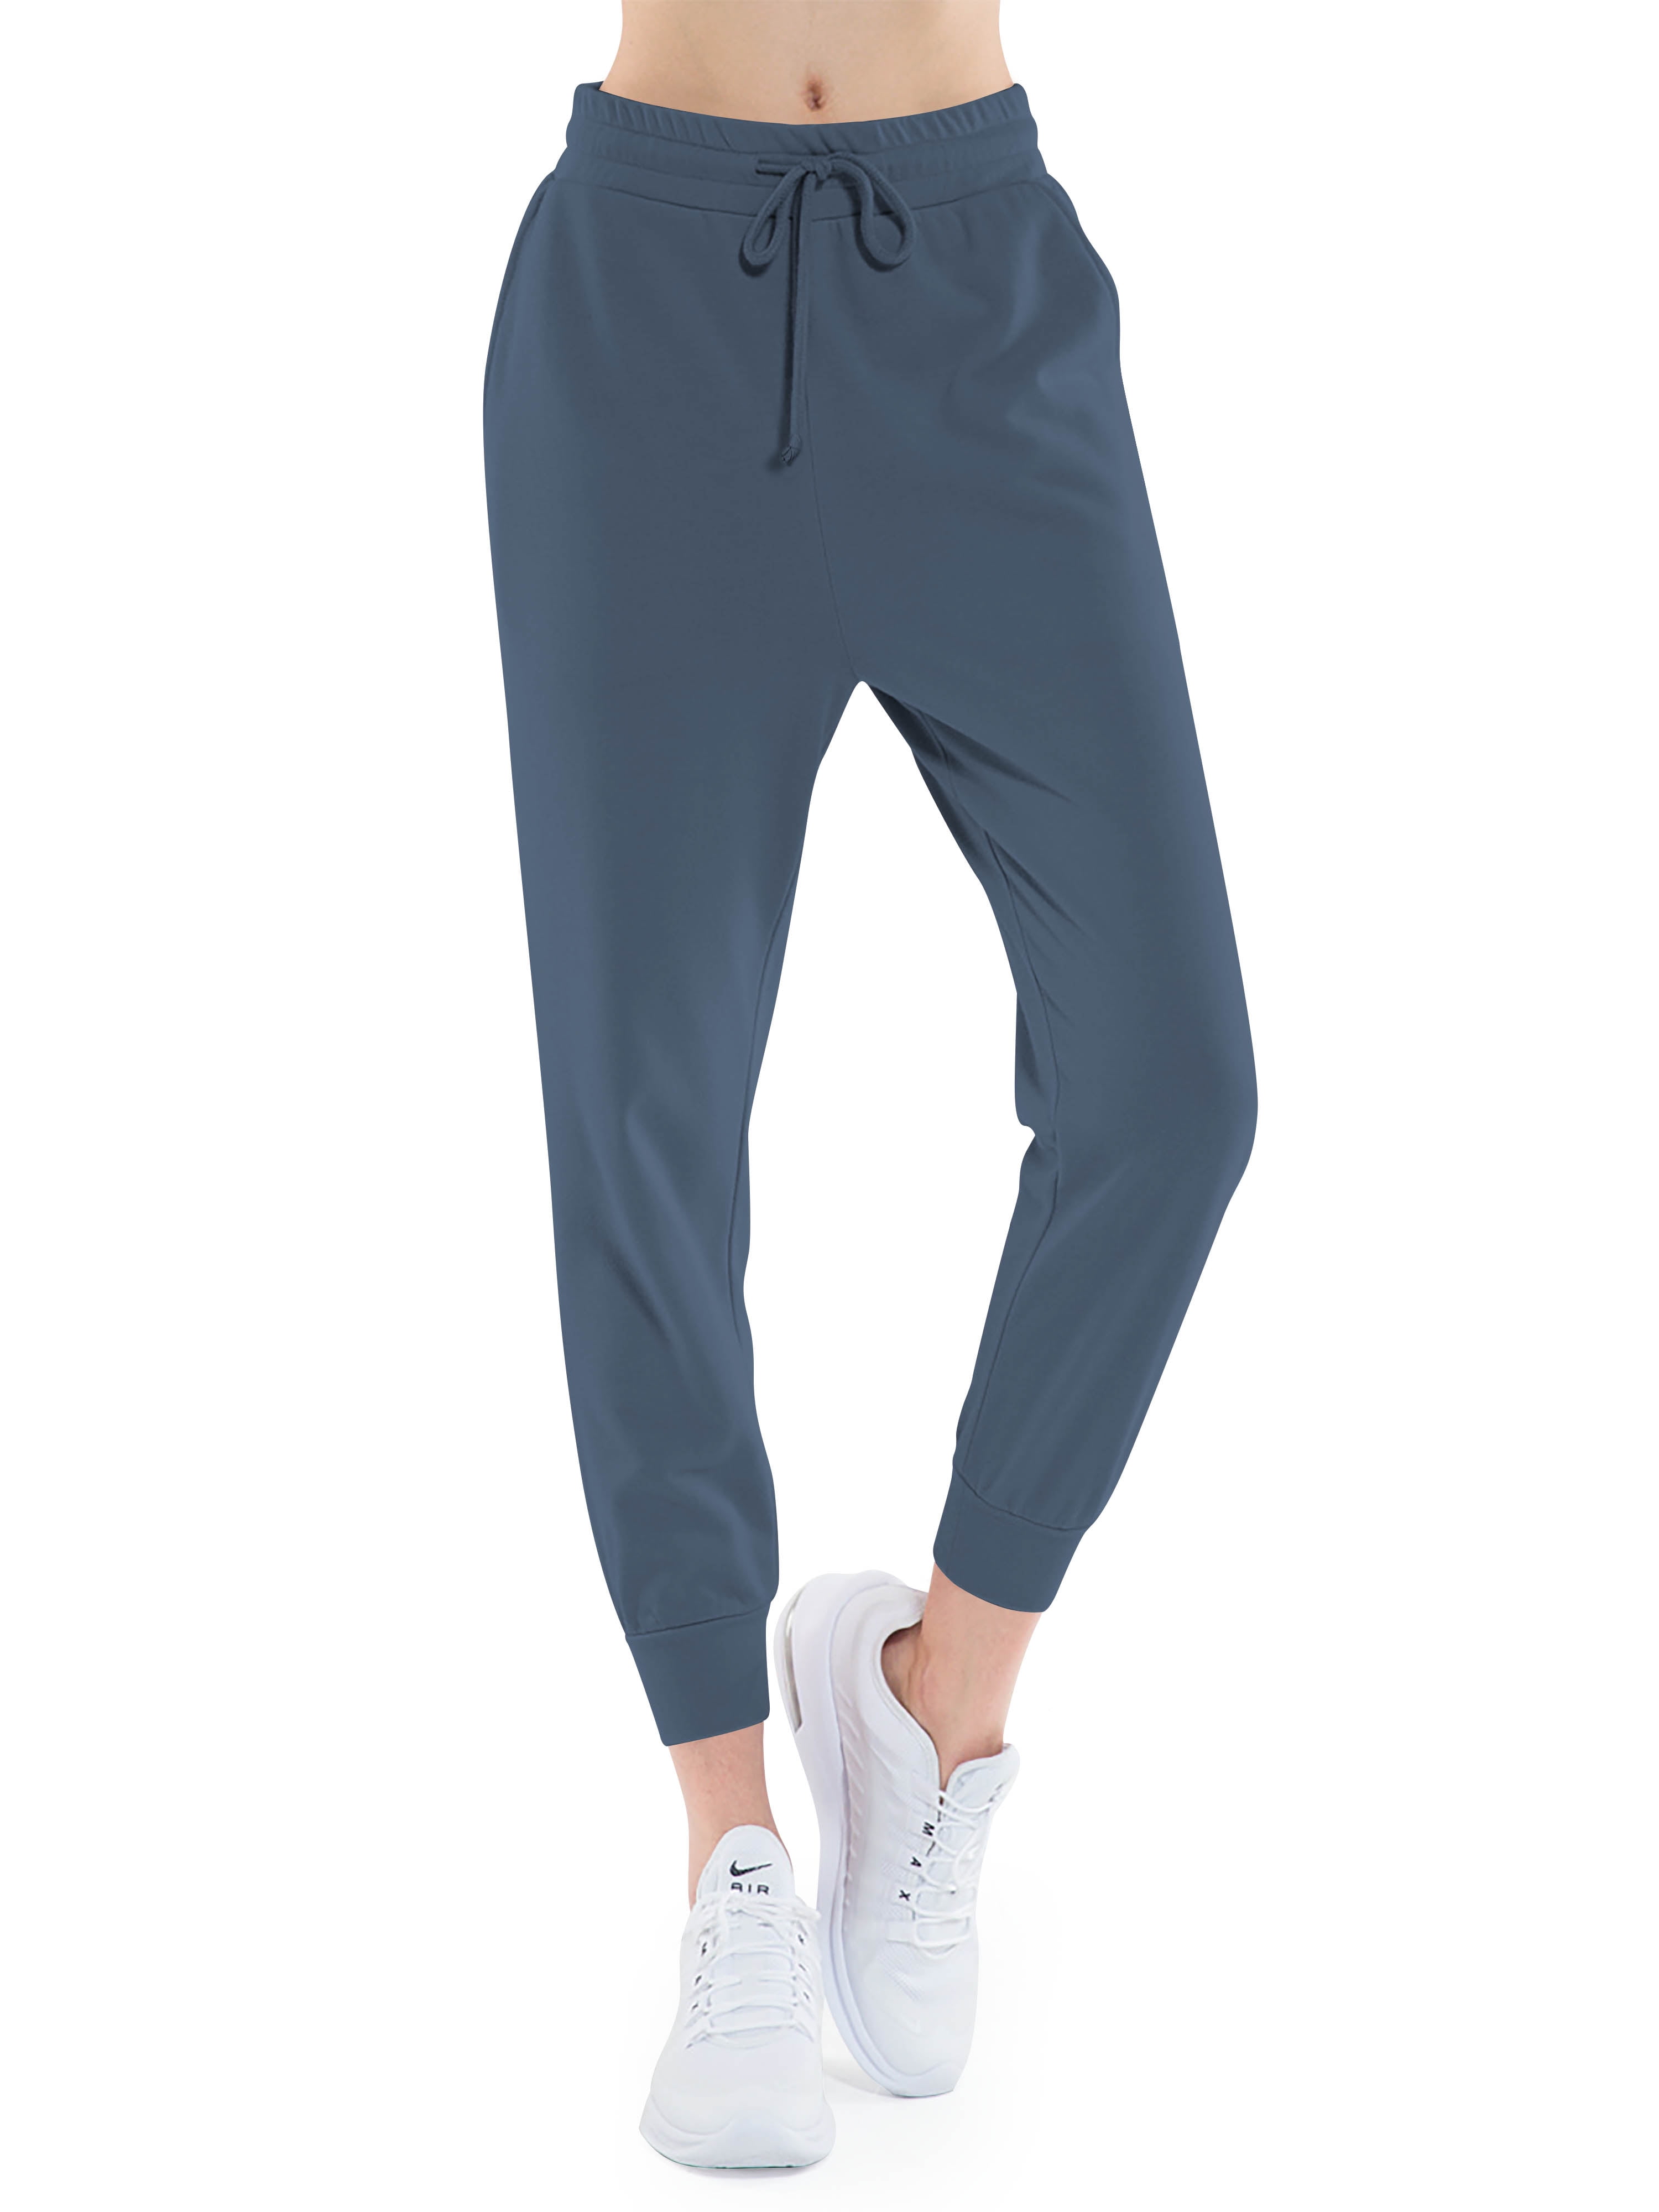 Women's French Terry Lightweight Sweatpants with Pockets 